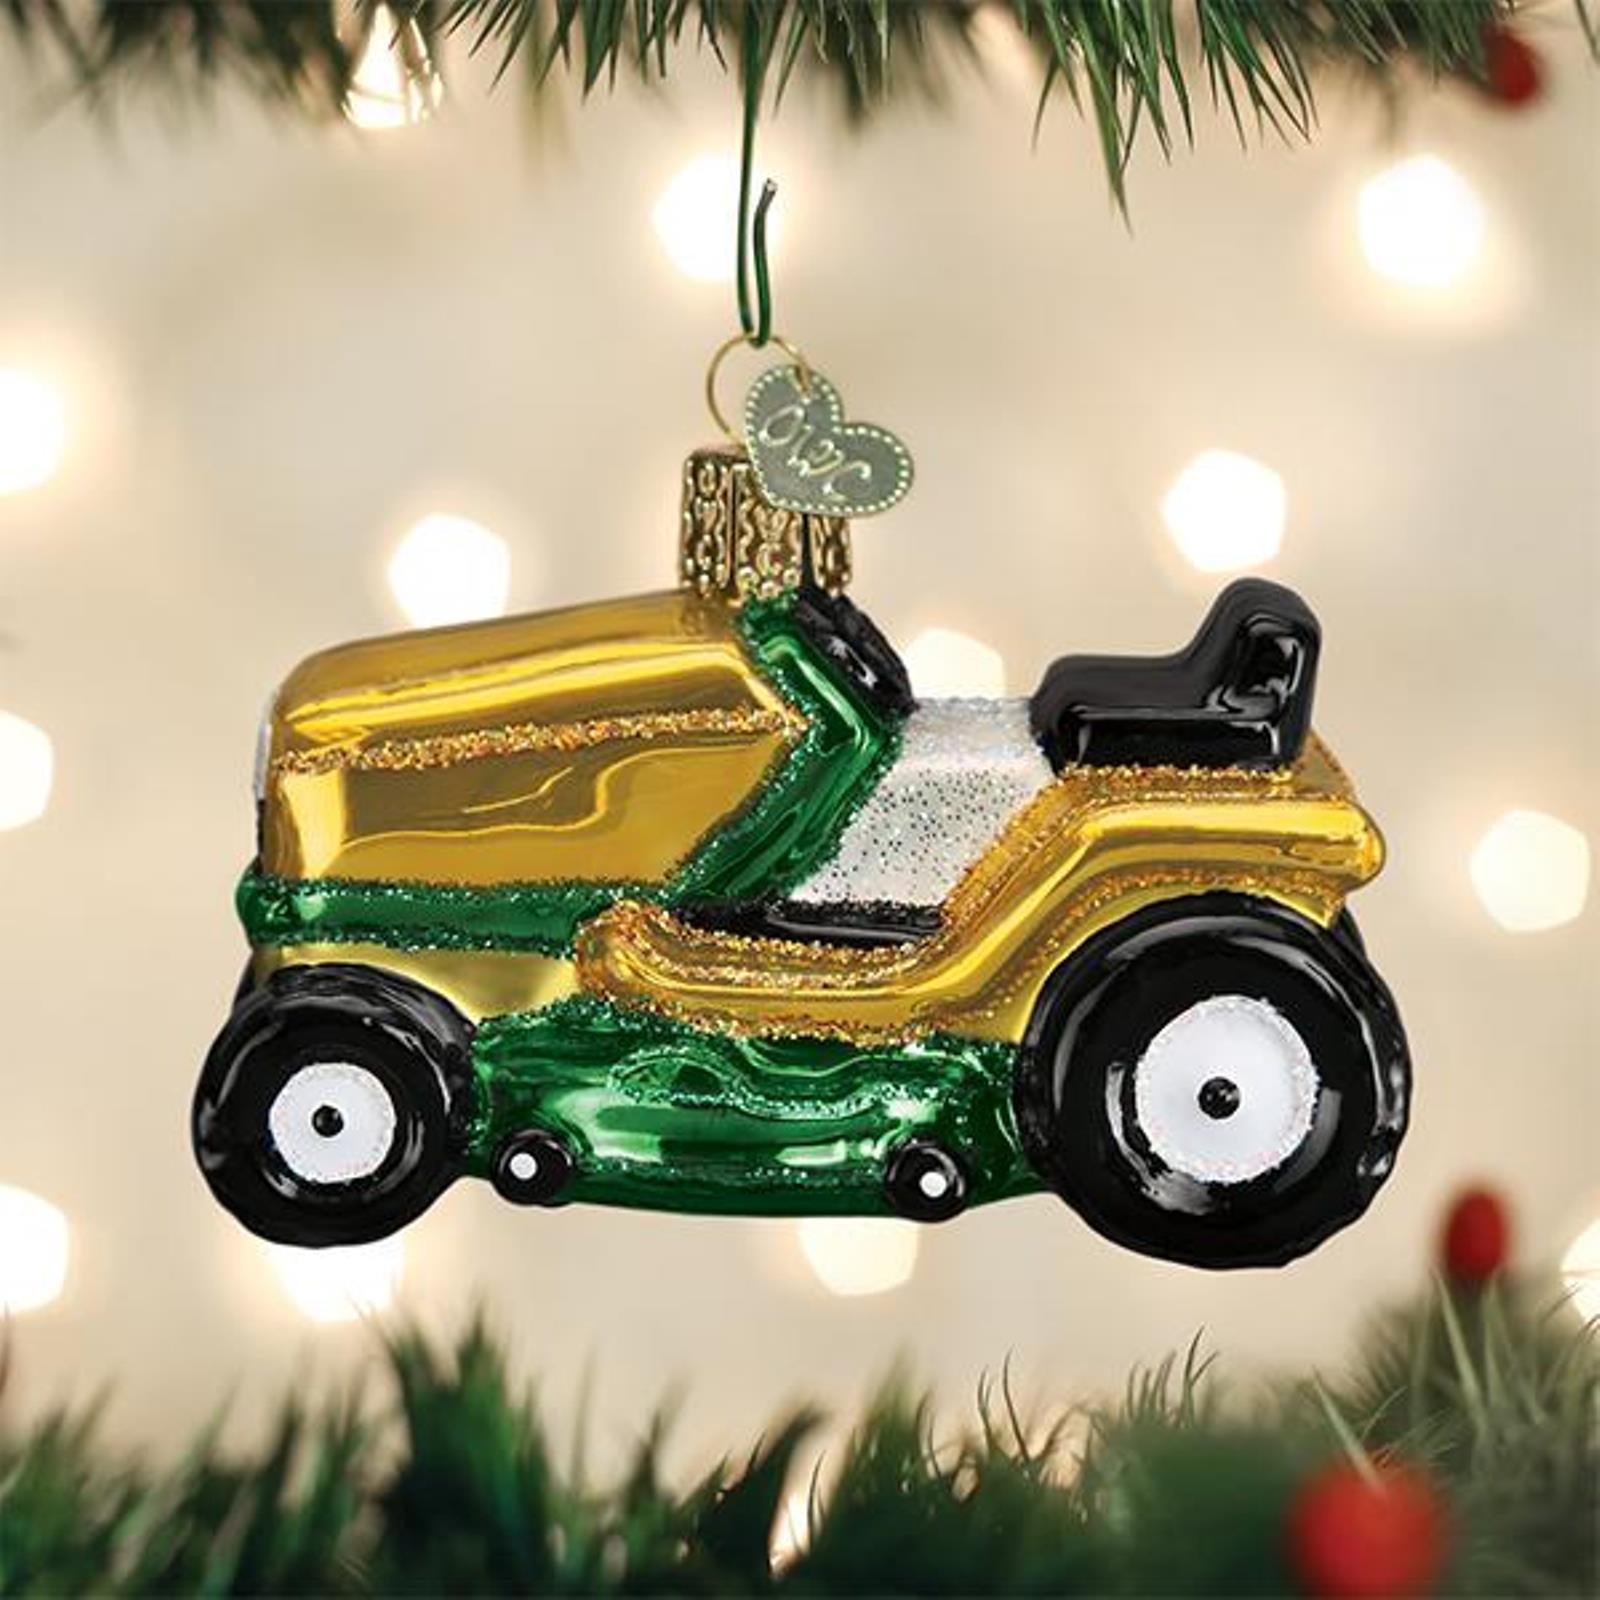 Old World Christmas Riding Lawn Mower Christmas Holiday Ornament